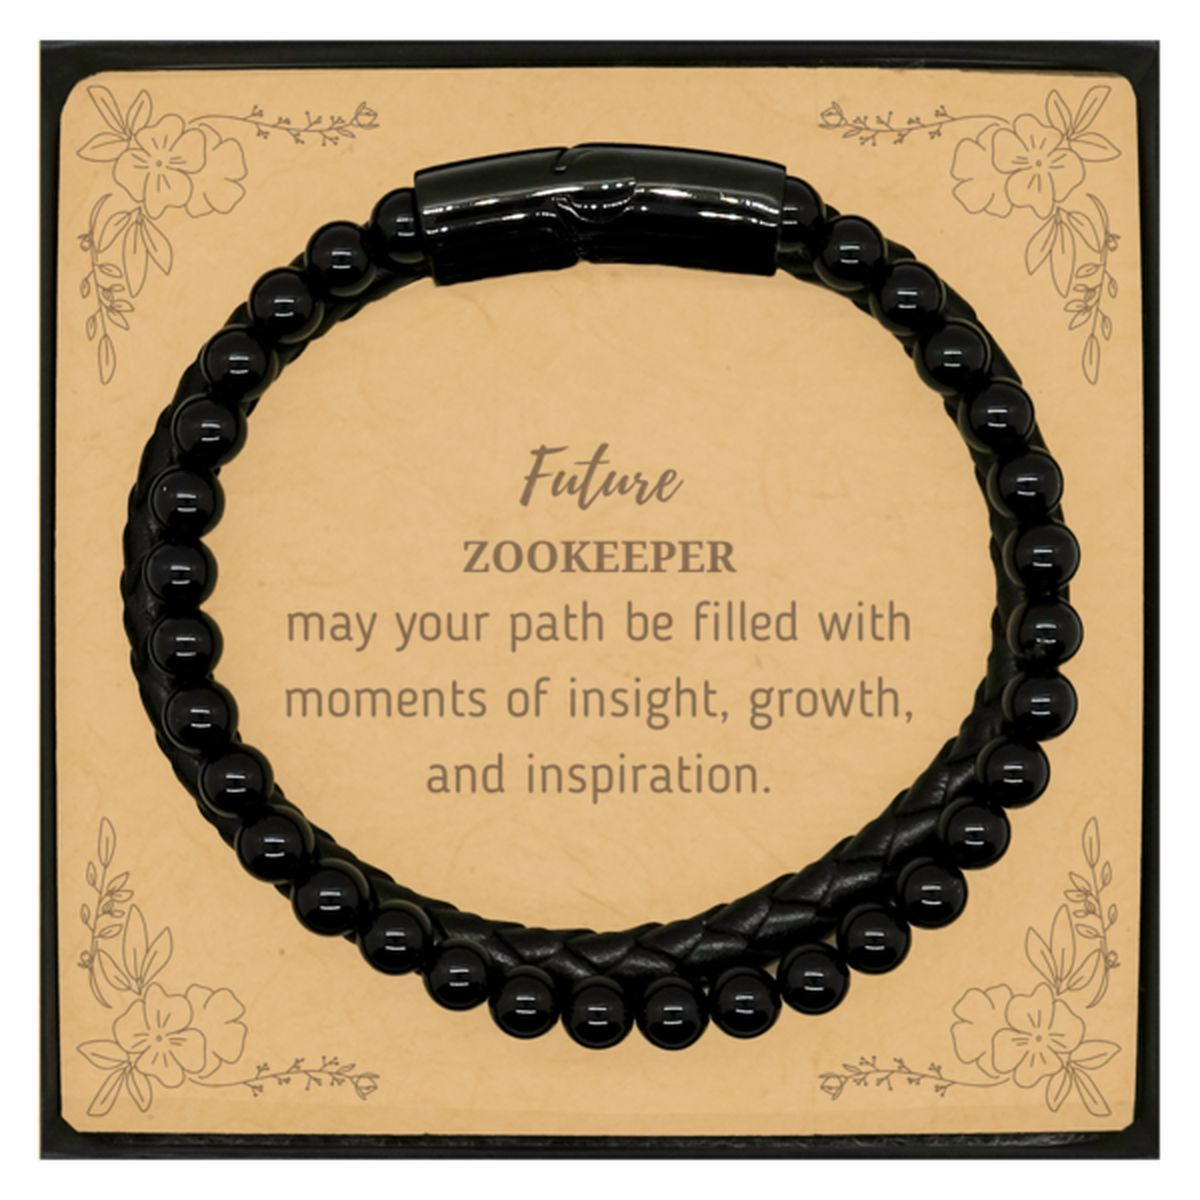 Future Zookeeper Gifts, May your path be filled with moments of insight, Graduation Gifts for New Zookeeper, Christmas Unique Stone Leather Bracelets For Men, Women, Friends